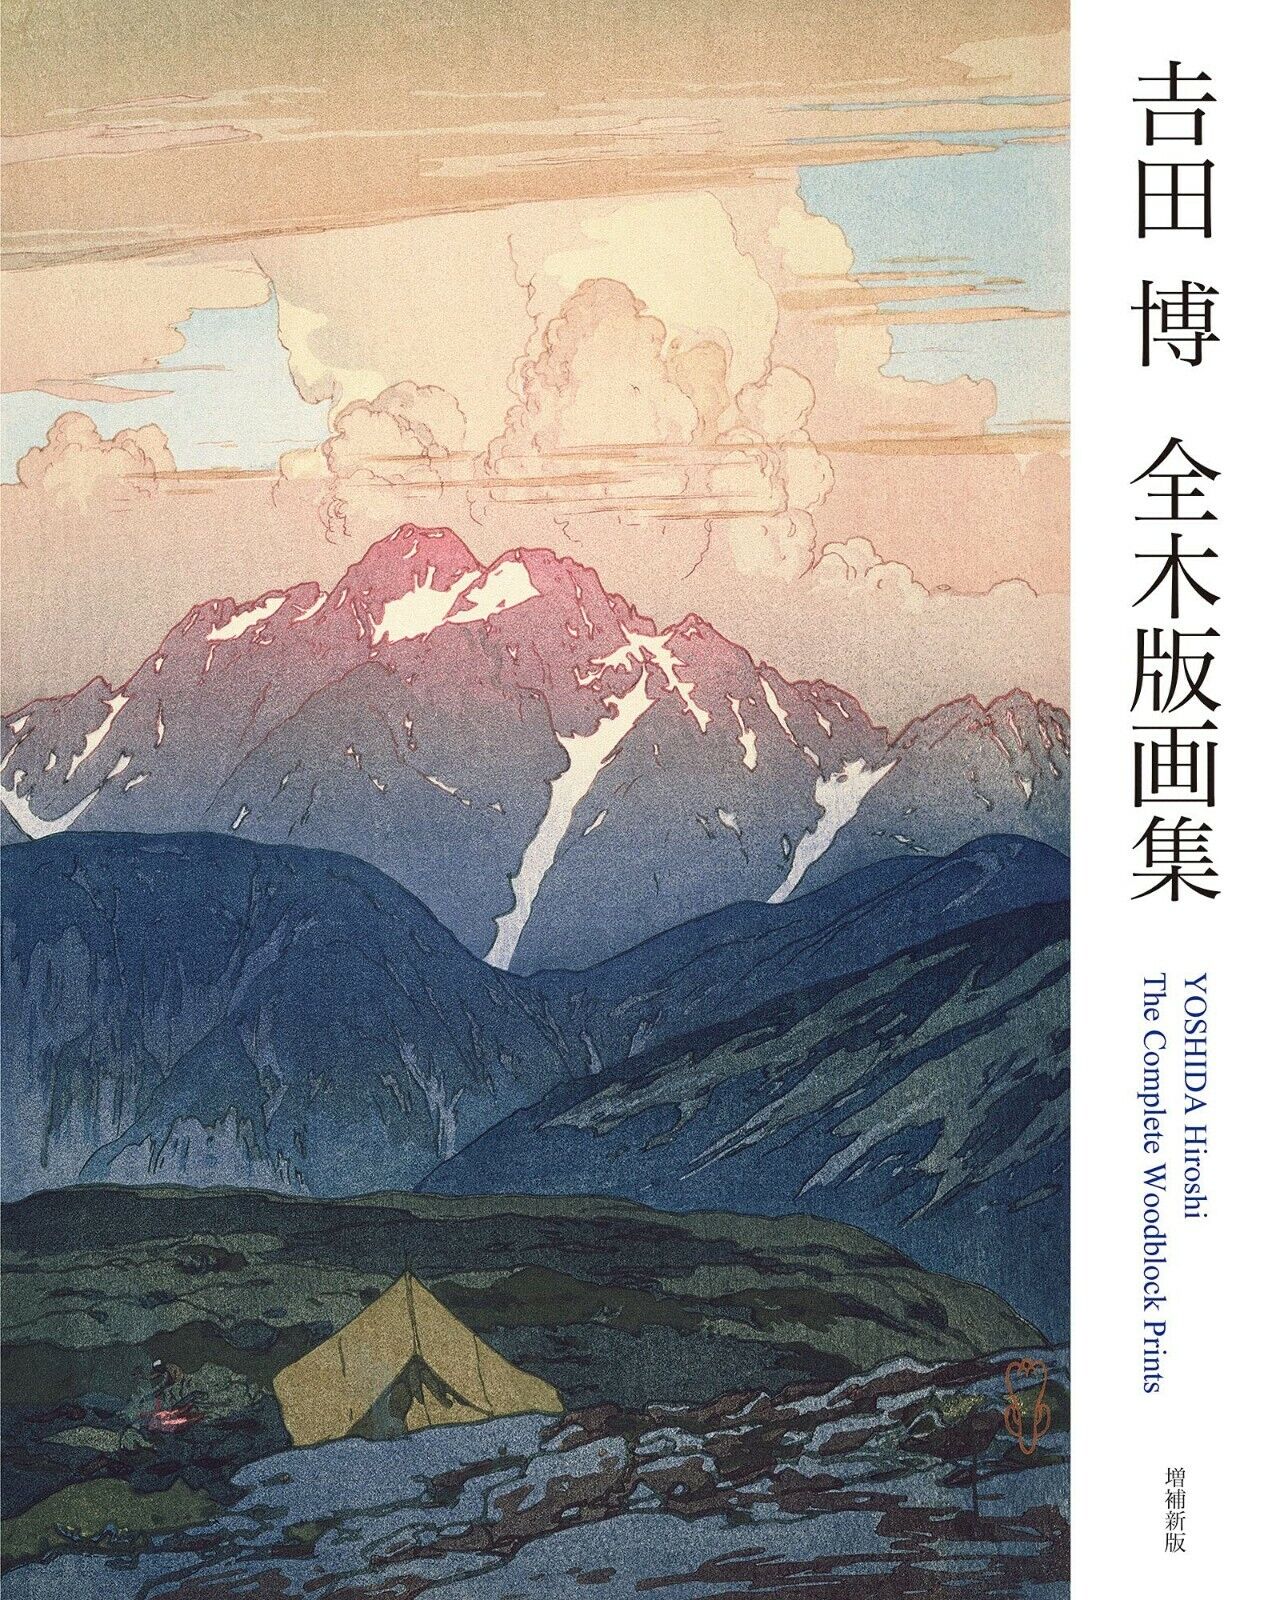 THE COMPLETE WOODBLOCK PRINTS OF YOSHIDA HIROSHI Book 2021 Works Collection